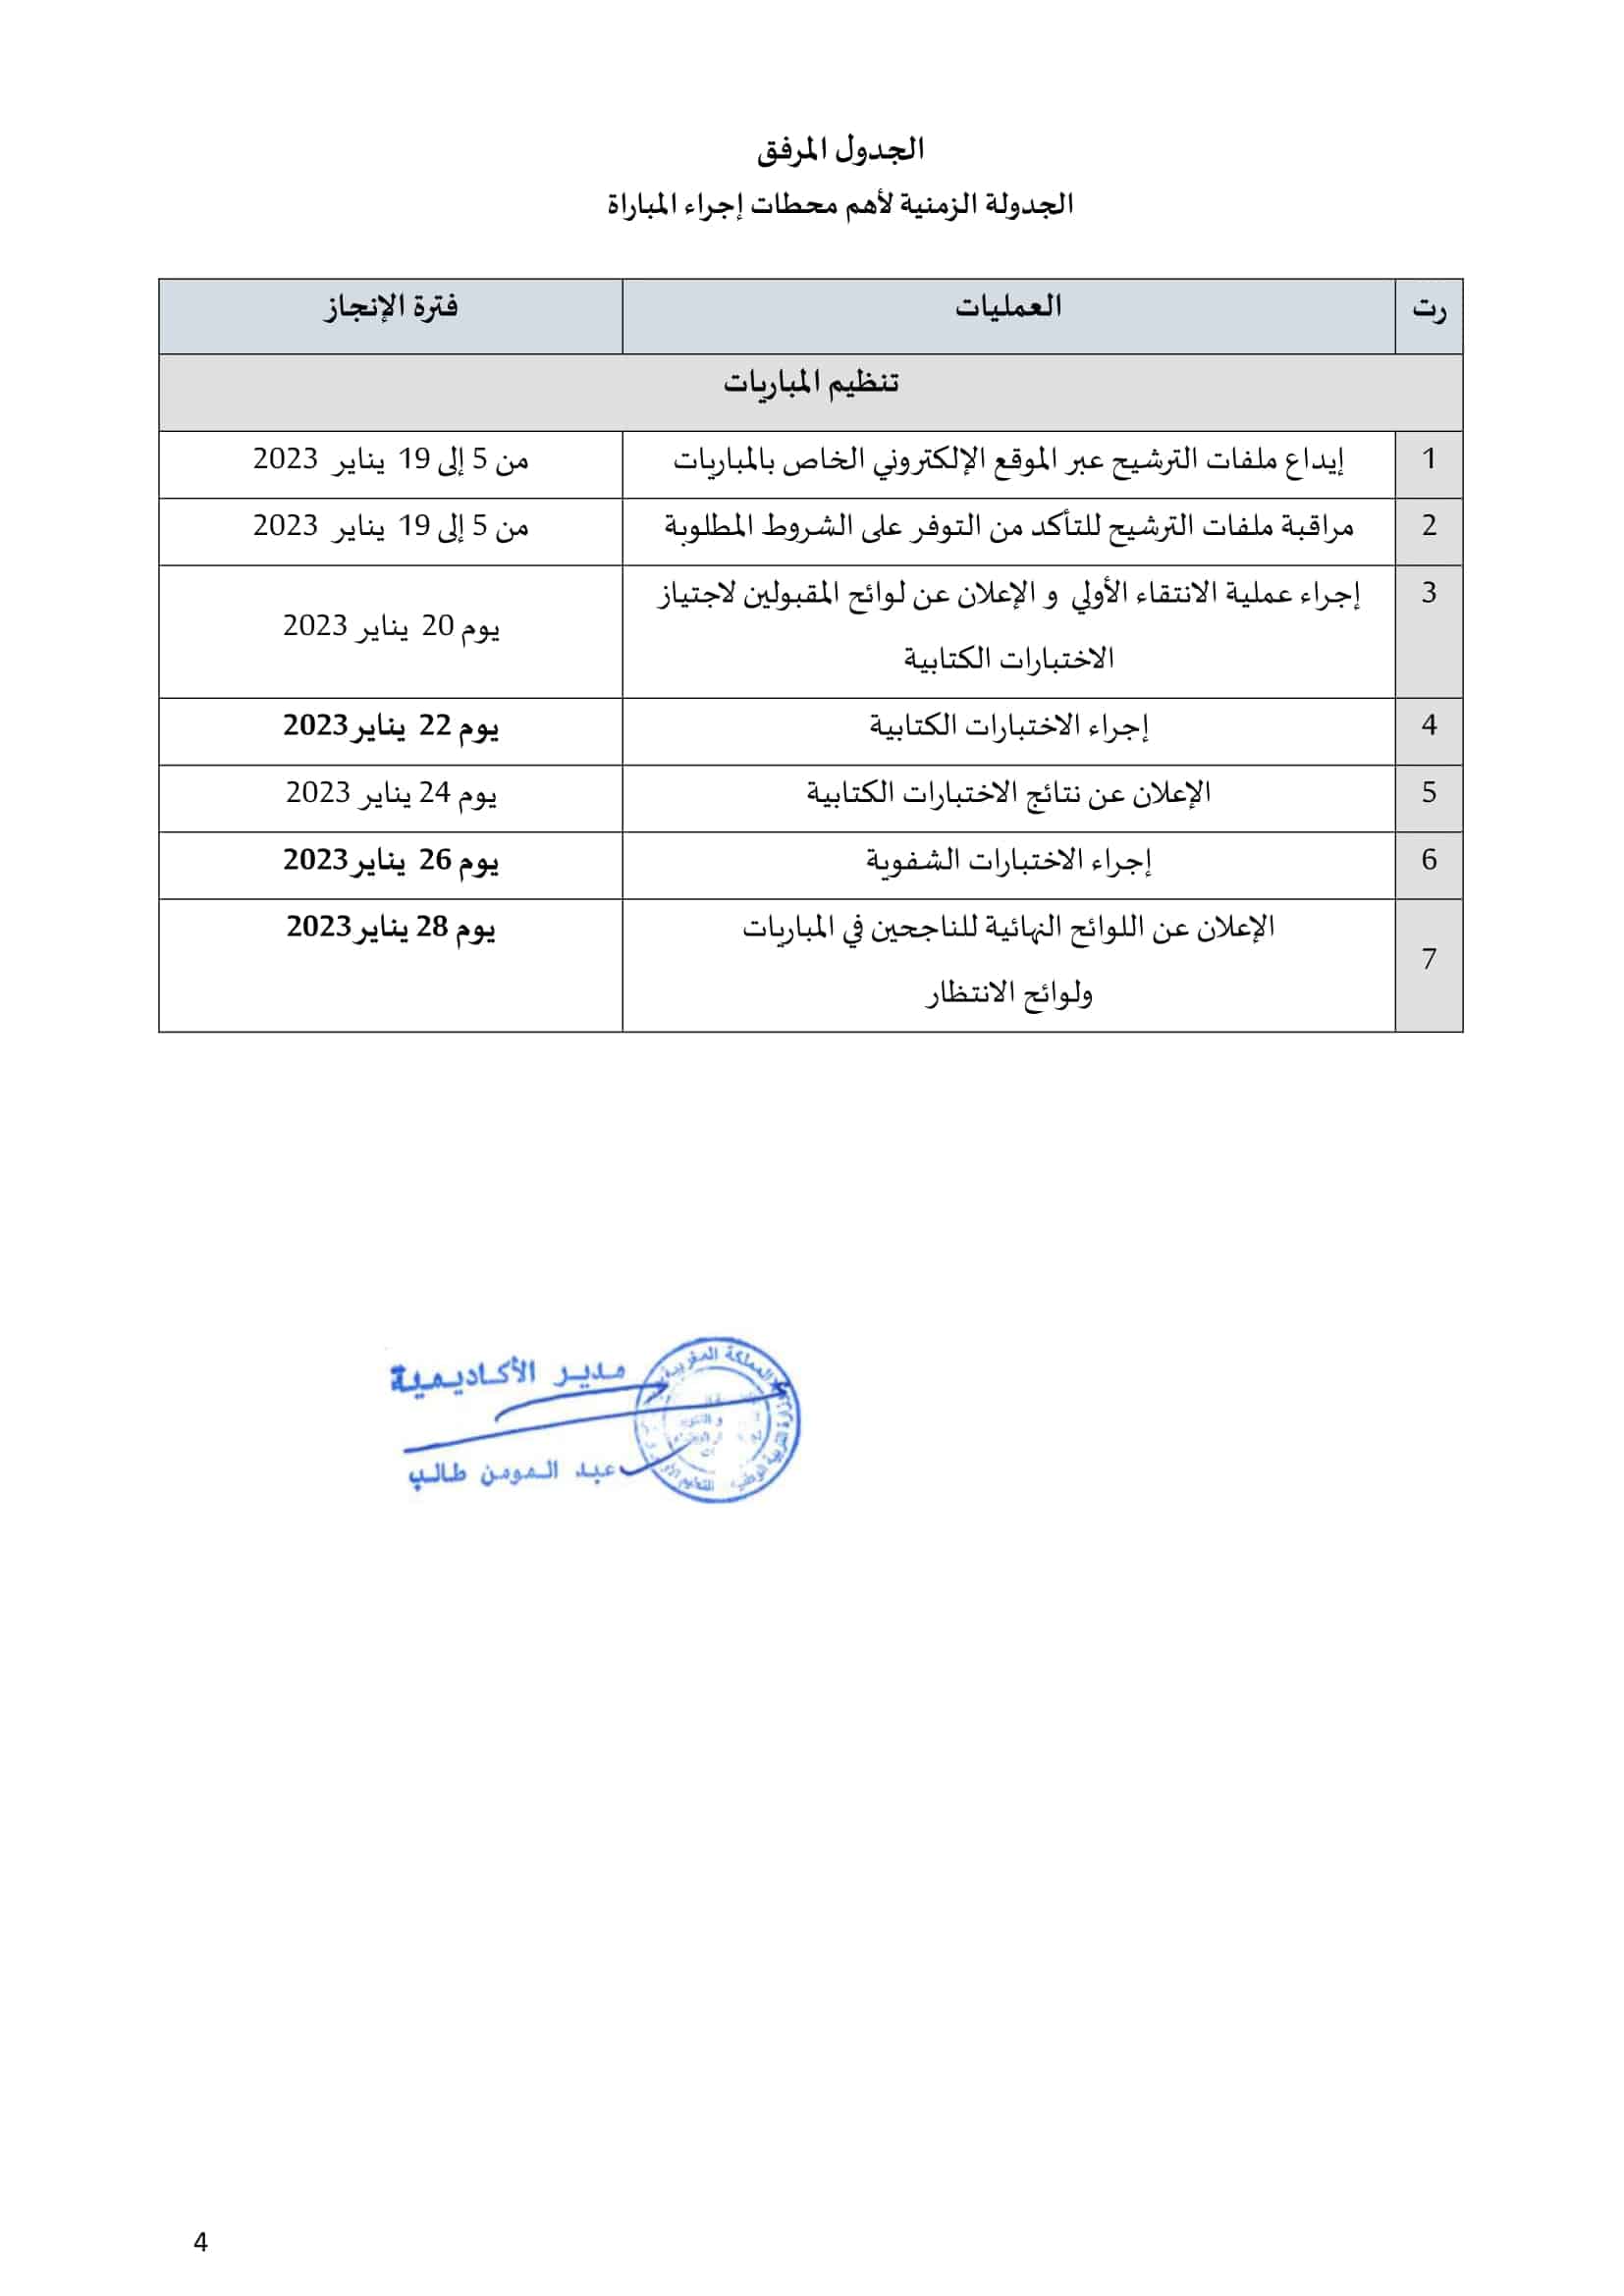 calendrier concours taalim secondaire 2023